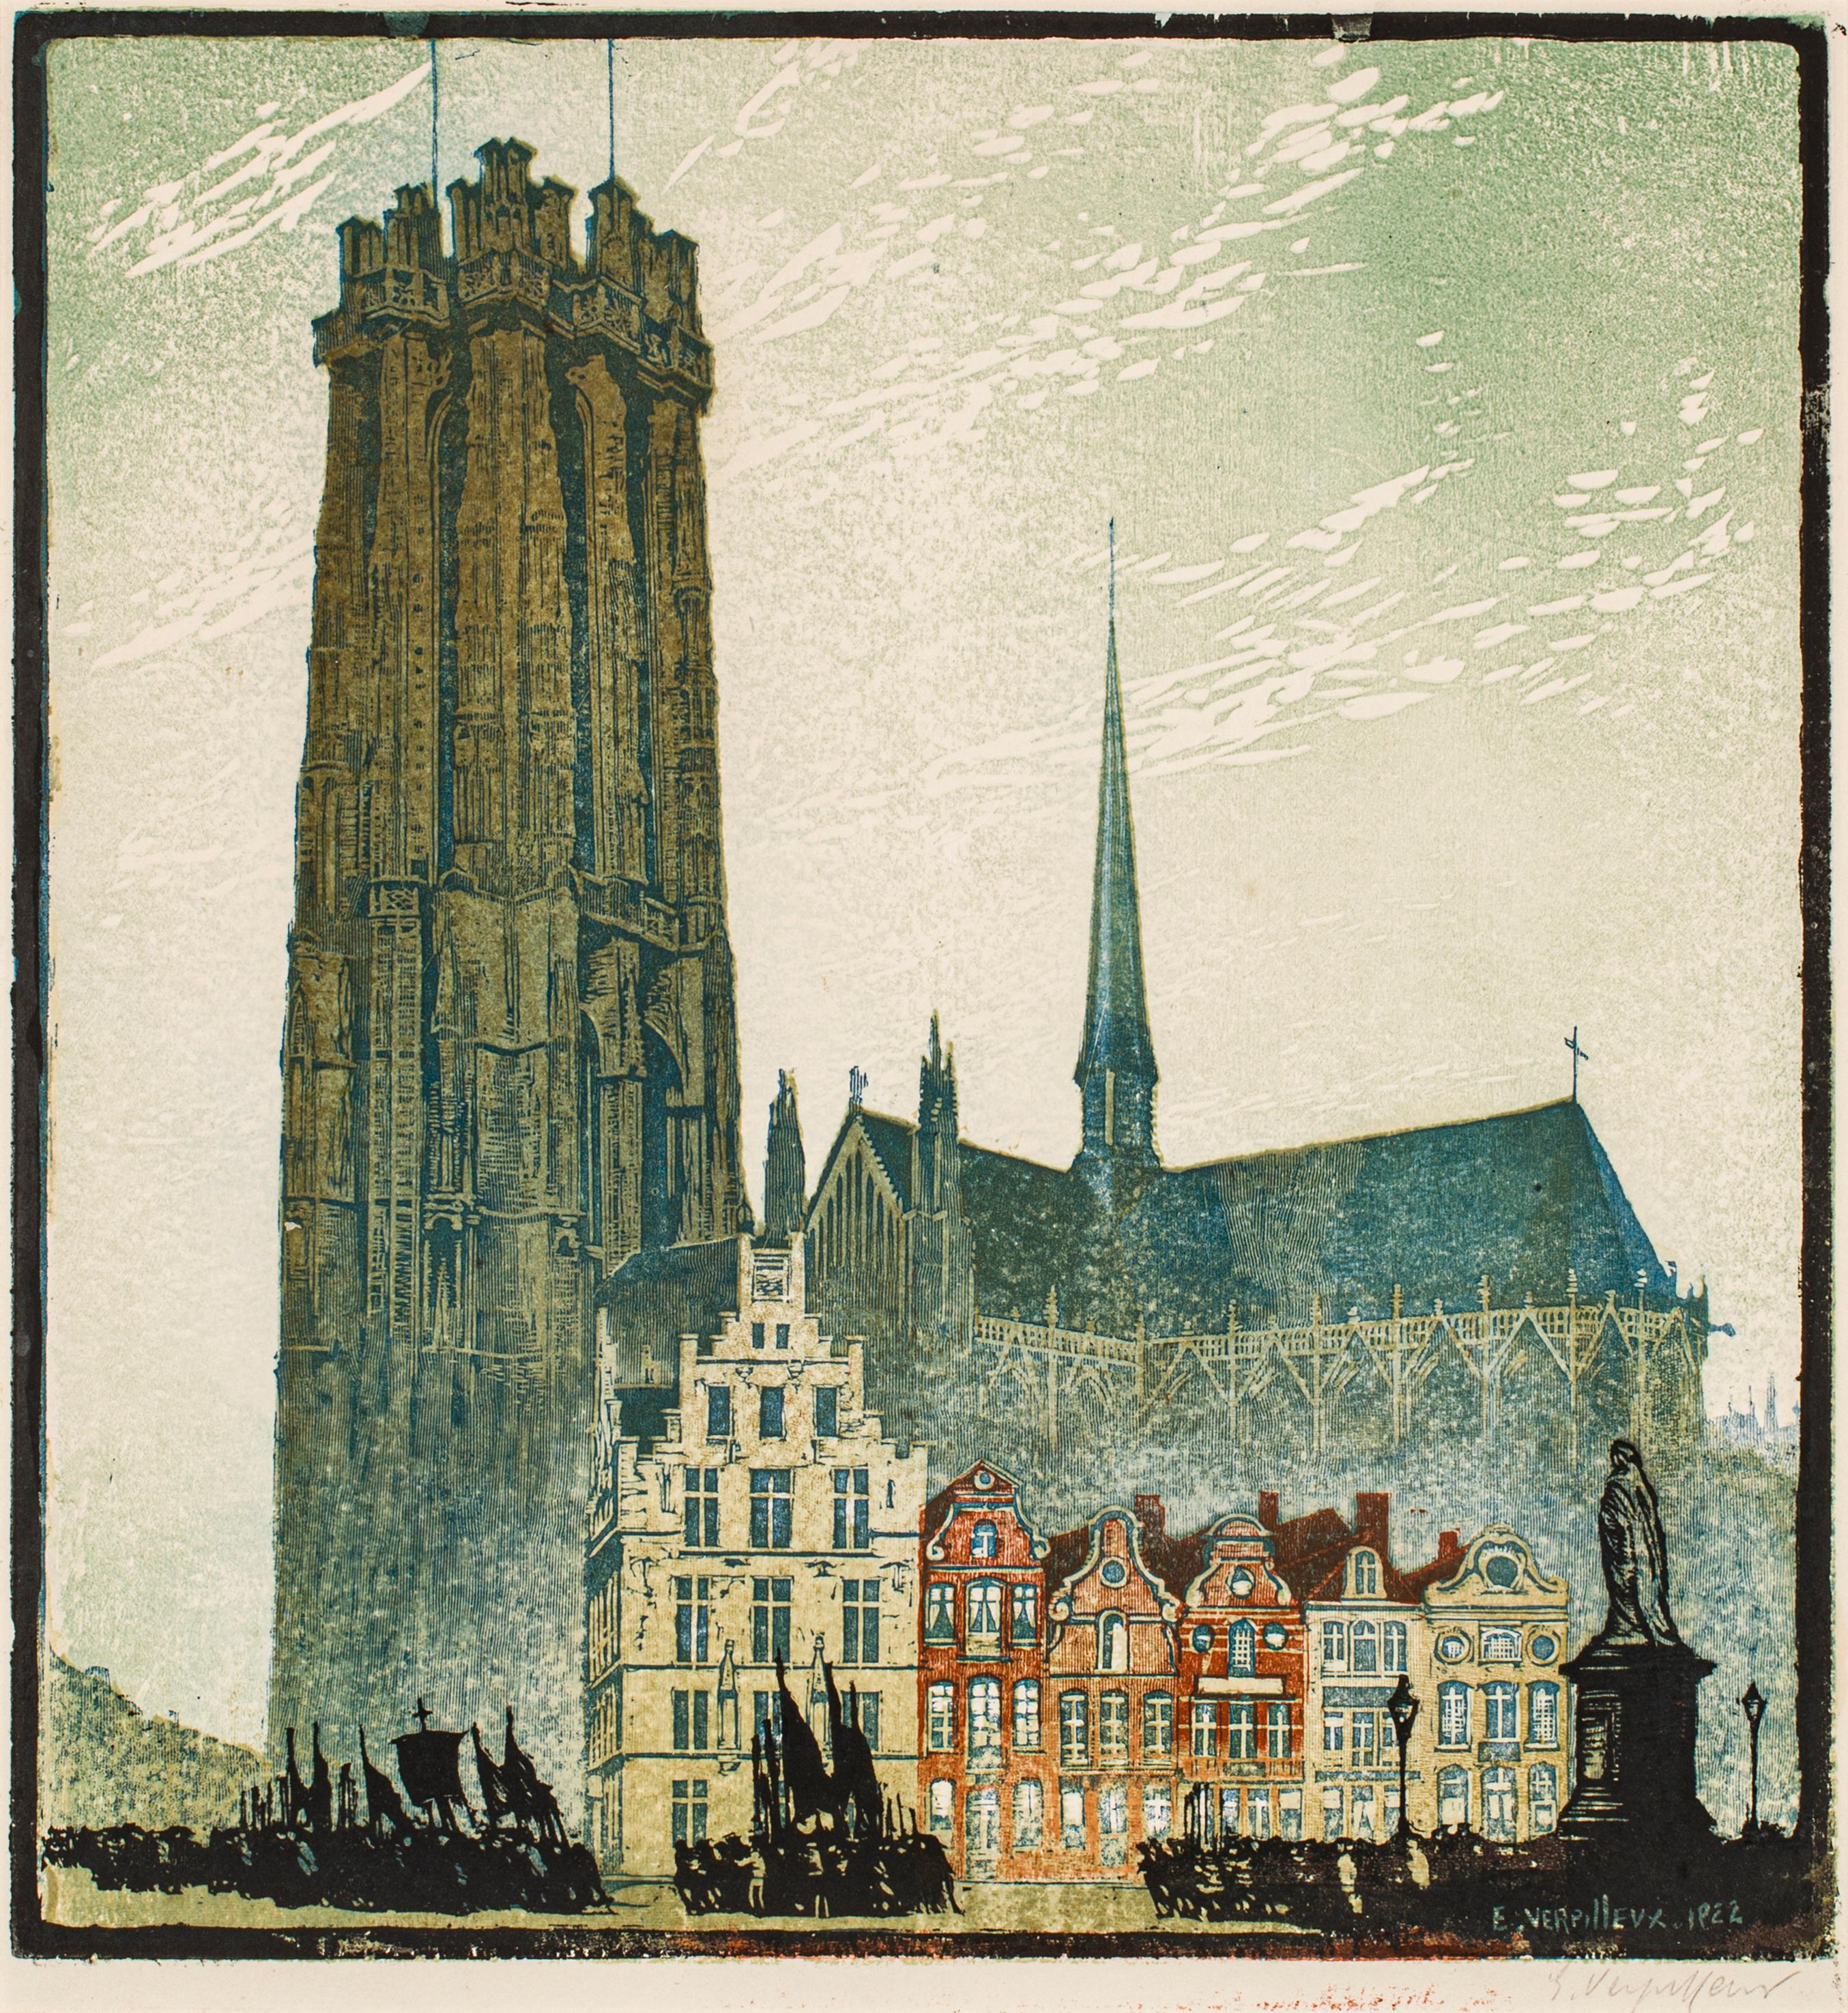 Emile Antoine Verpilleux, 1888-1964
Malines, 1922
Original woodcut, printed in colors
14 x 15 inches
Signed in pencil